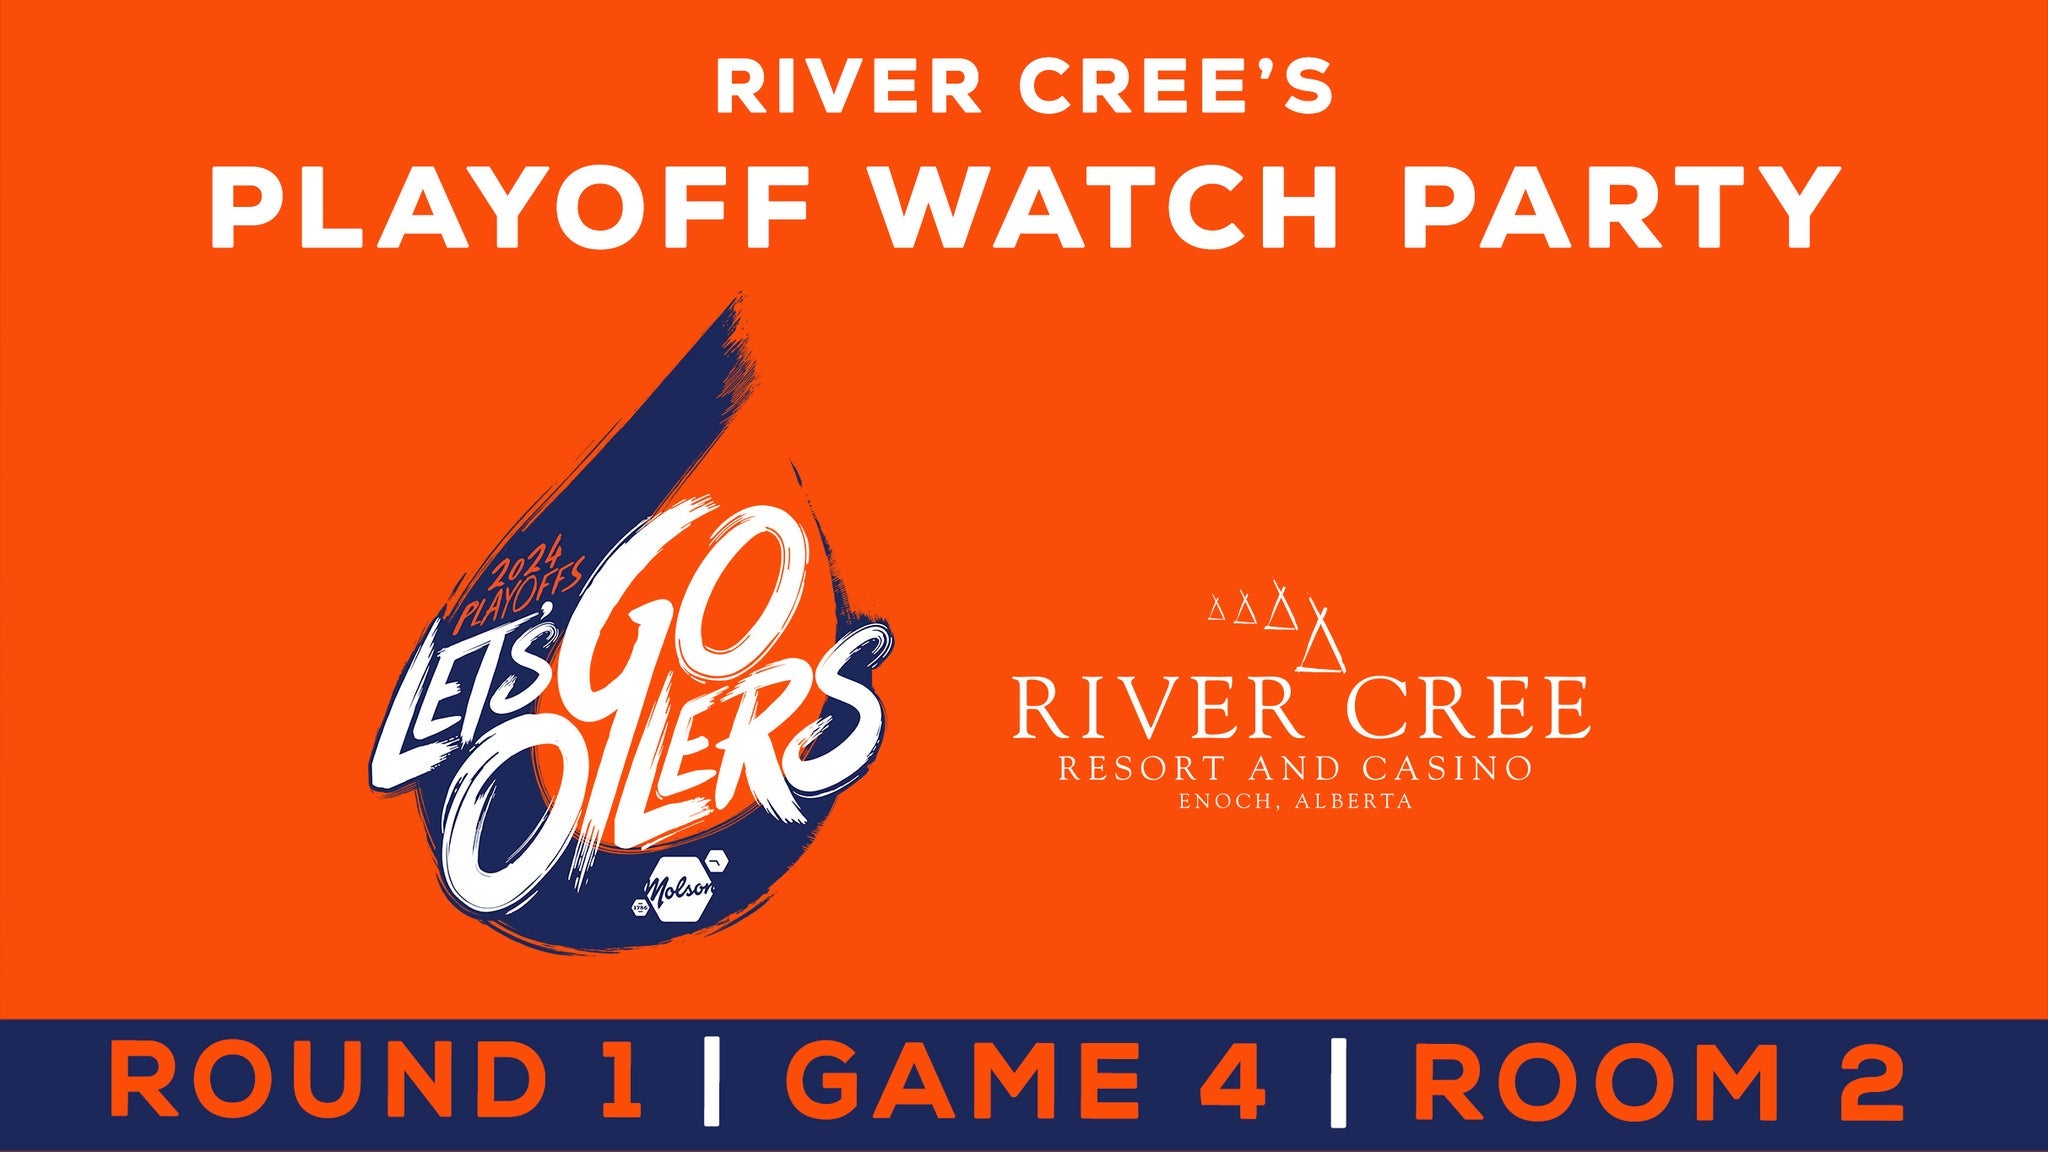 Oiler's Watch Party - Round 1 - Game 4 - Room 2 in Enoch promo photo for First Nation Discount-Status Card Holder presale offer code